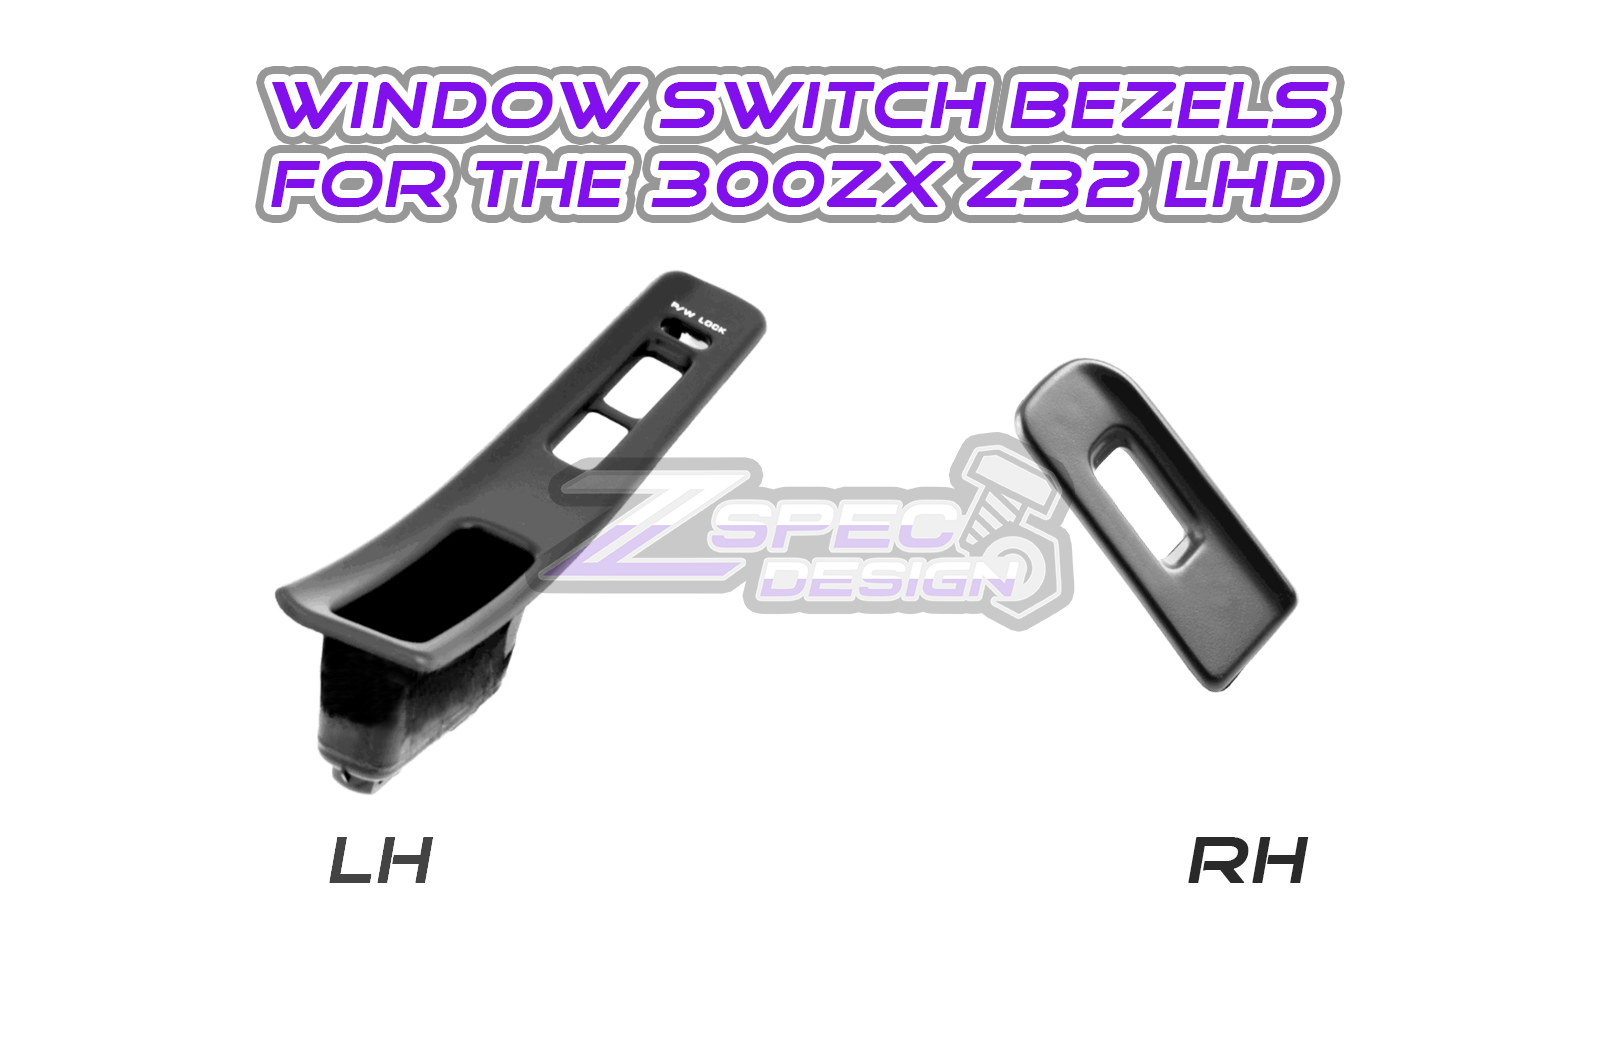 Nissan 300zx Z32 Window Switch Products - ZSPEC Design LLC  Bezels Finishers Buttons Clips and more - restore your classic Z32 300zx's interior with ZSPEC Design custom and reproduction products.